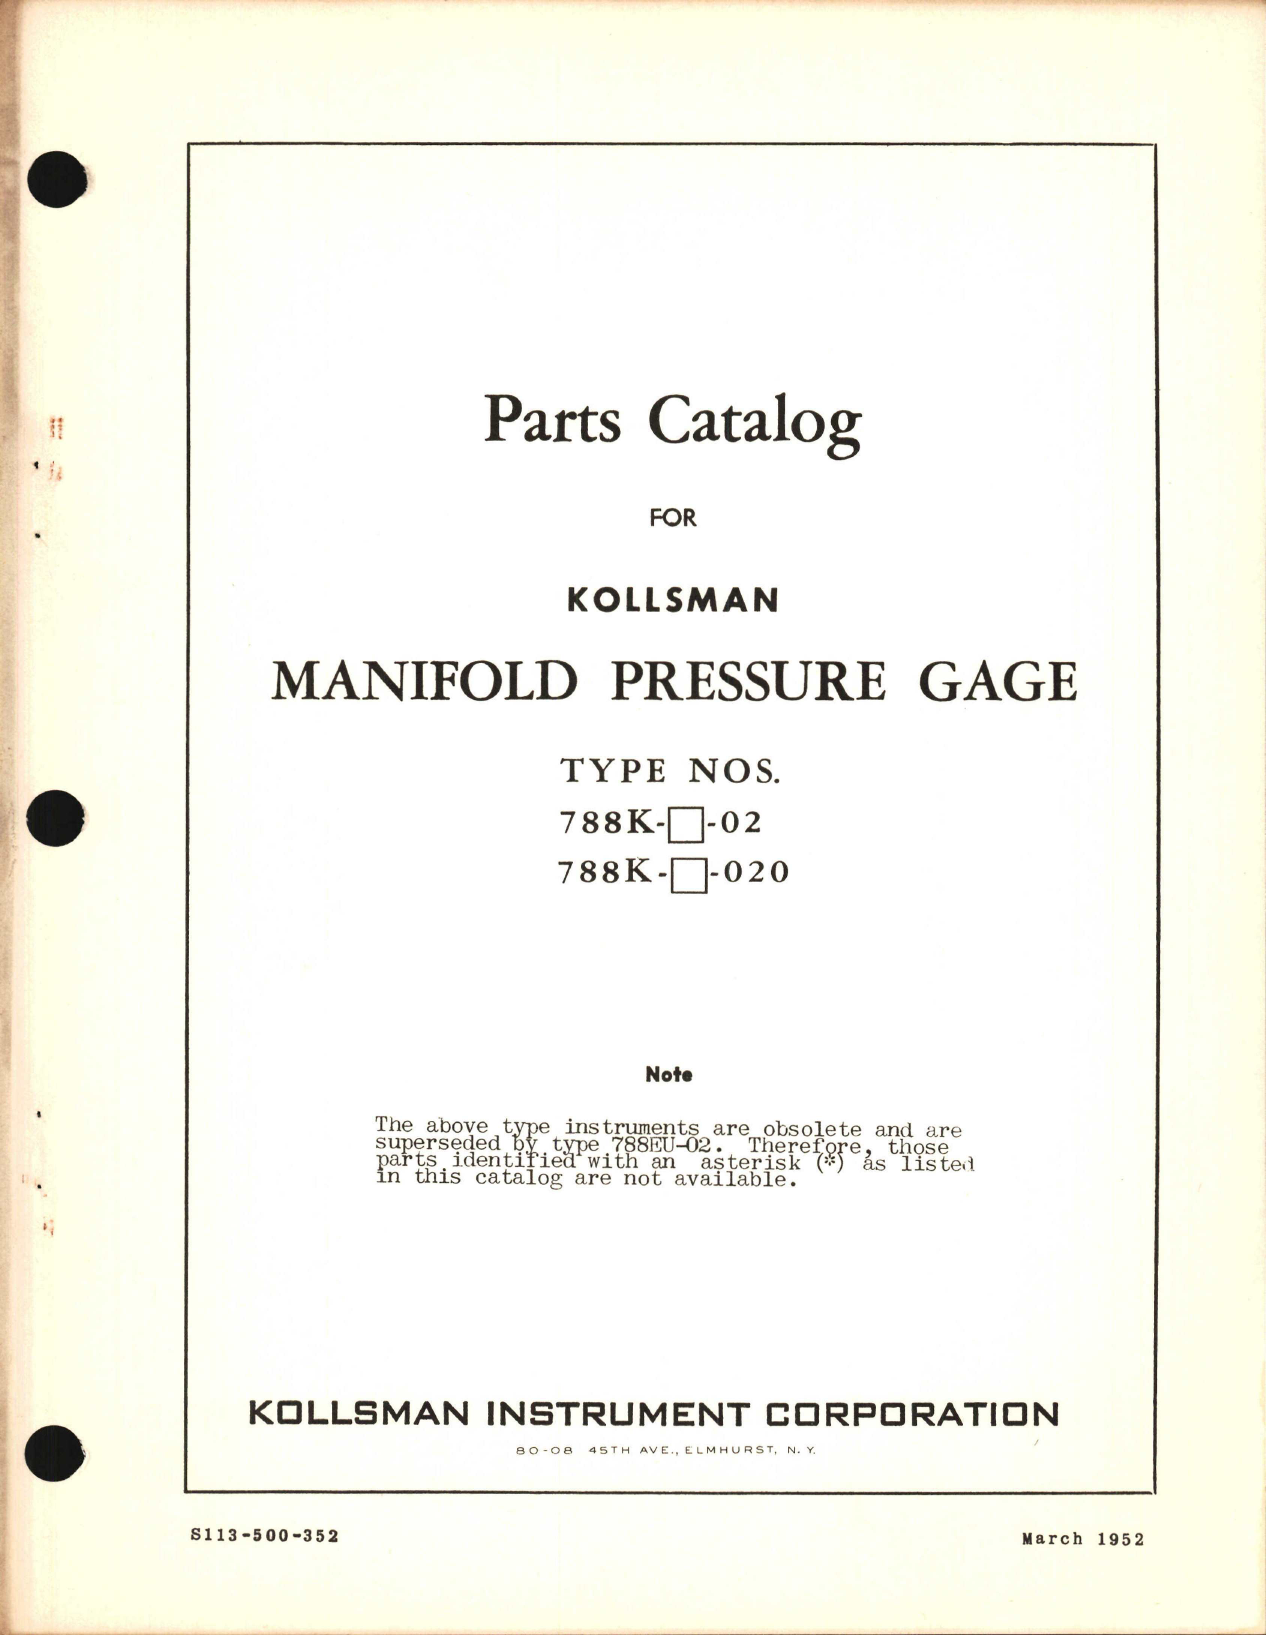 Sample page 1 from AirCorps Library document: Parts Catalog for Kollsman Manifold Pressure Gage